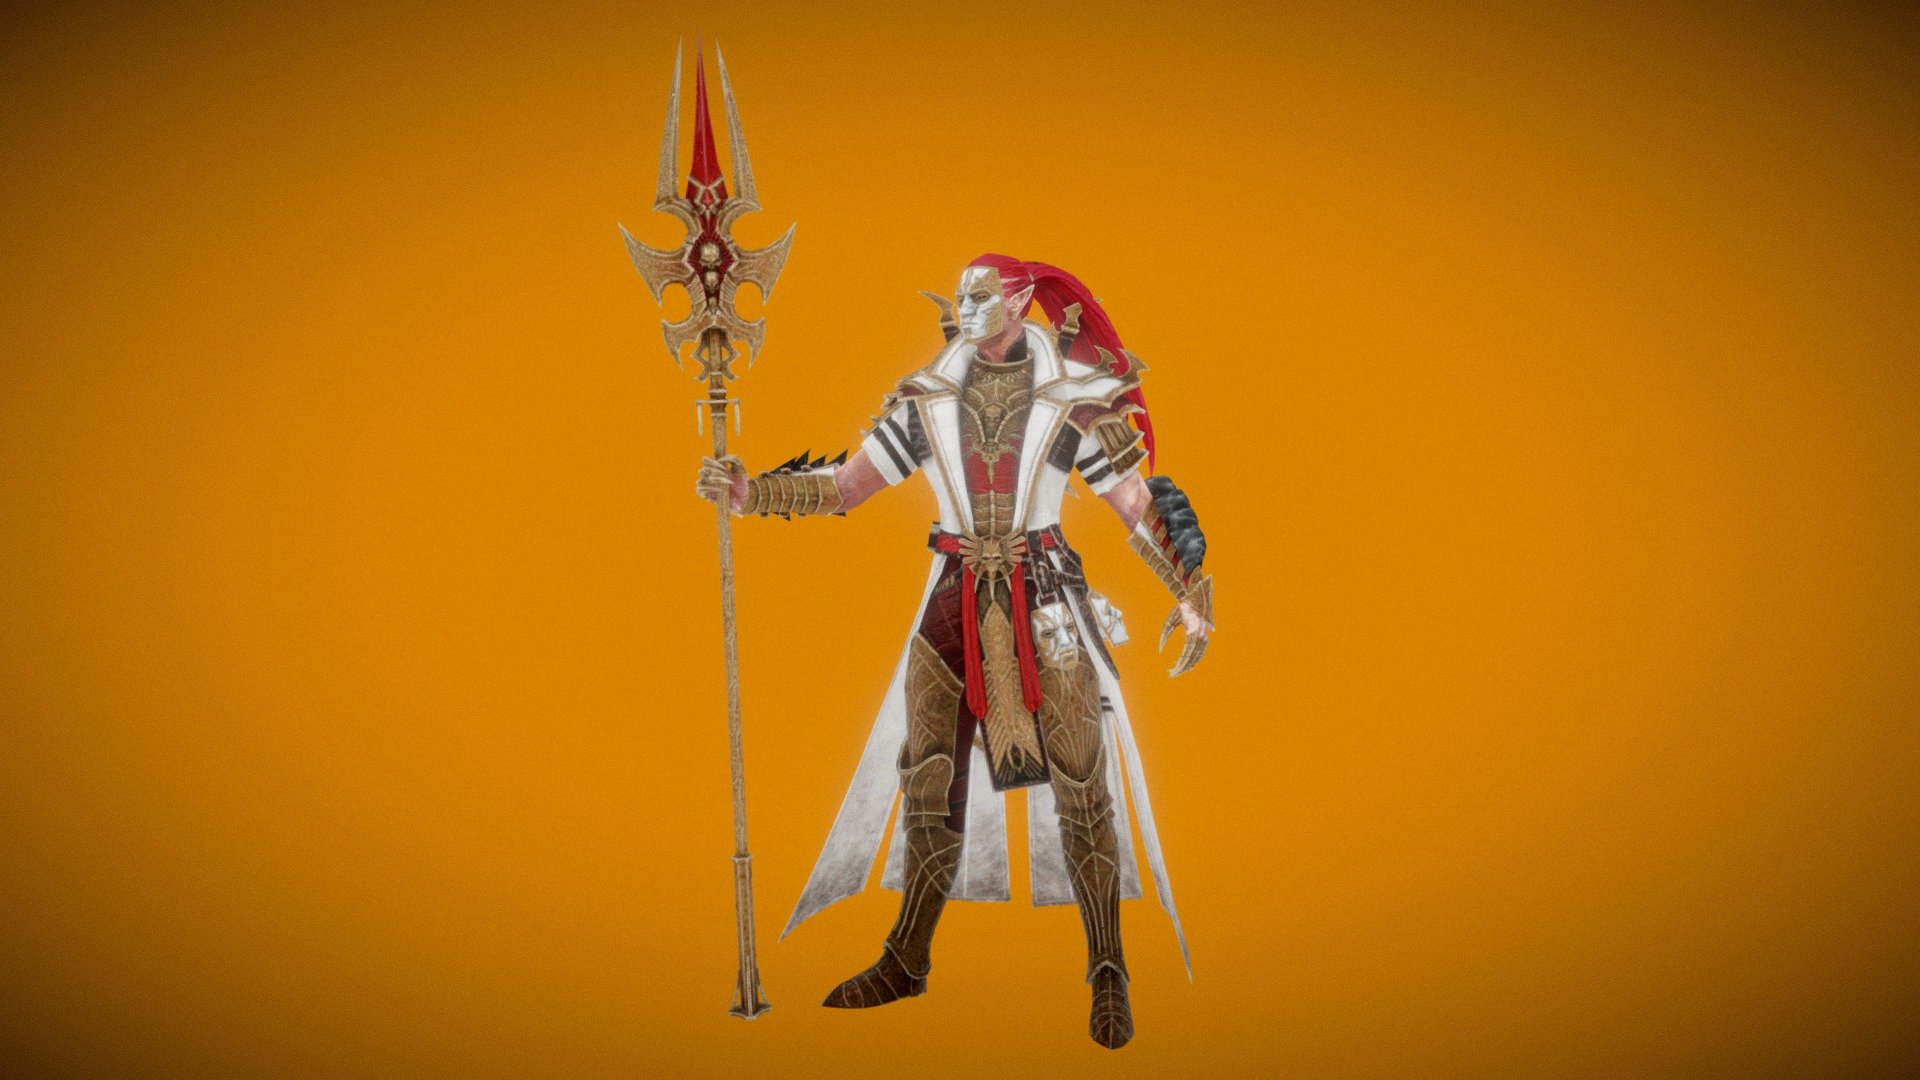 Lowpoly model of Spear worrior with annimations,game ready,rigged, PBR textures. Include weapons and nude mesh. Ready to import into various game engine like UE4 and Unity. Include nude meshes This character would work well as an NPC, a rank-and-file enemy, or a boss for a fantasy game. This character is of different proportions than the standard Epic Skeleton. The visualization of this character was done in Blender, Substance Painter. The rendering result in other versions with different settings may vary.

+Come with 4 part: body face hair weapons.

+Total poly count for each body version (include weapons)

+Rigging use FBX skin. Full body rig and basic facial rig.

+PBR textures (Metallic-Roughness) . DirectX Normal Maps. .PNG format.

Model+Texture+Animations on .GLB Format file

+Update: Blender with rigged mesh and full materials setup.

Let me know if you have any questions, I’ll be glad to help! - Spear warrior - Buy Royalty Free 3D model by Luna Studio (@StudioLuna) 3d model